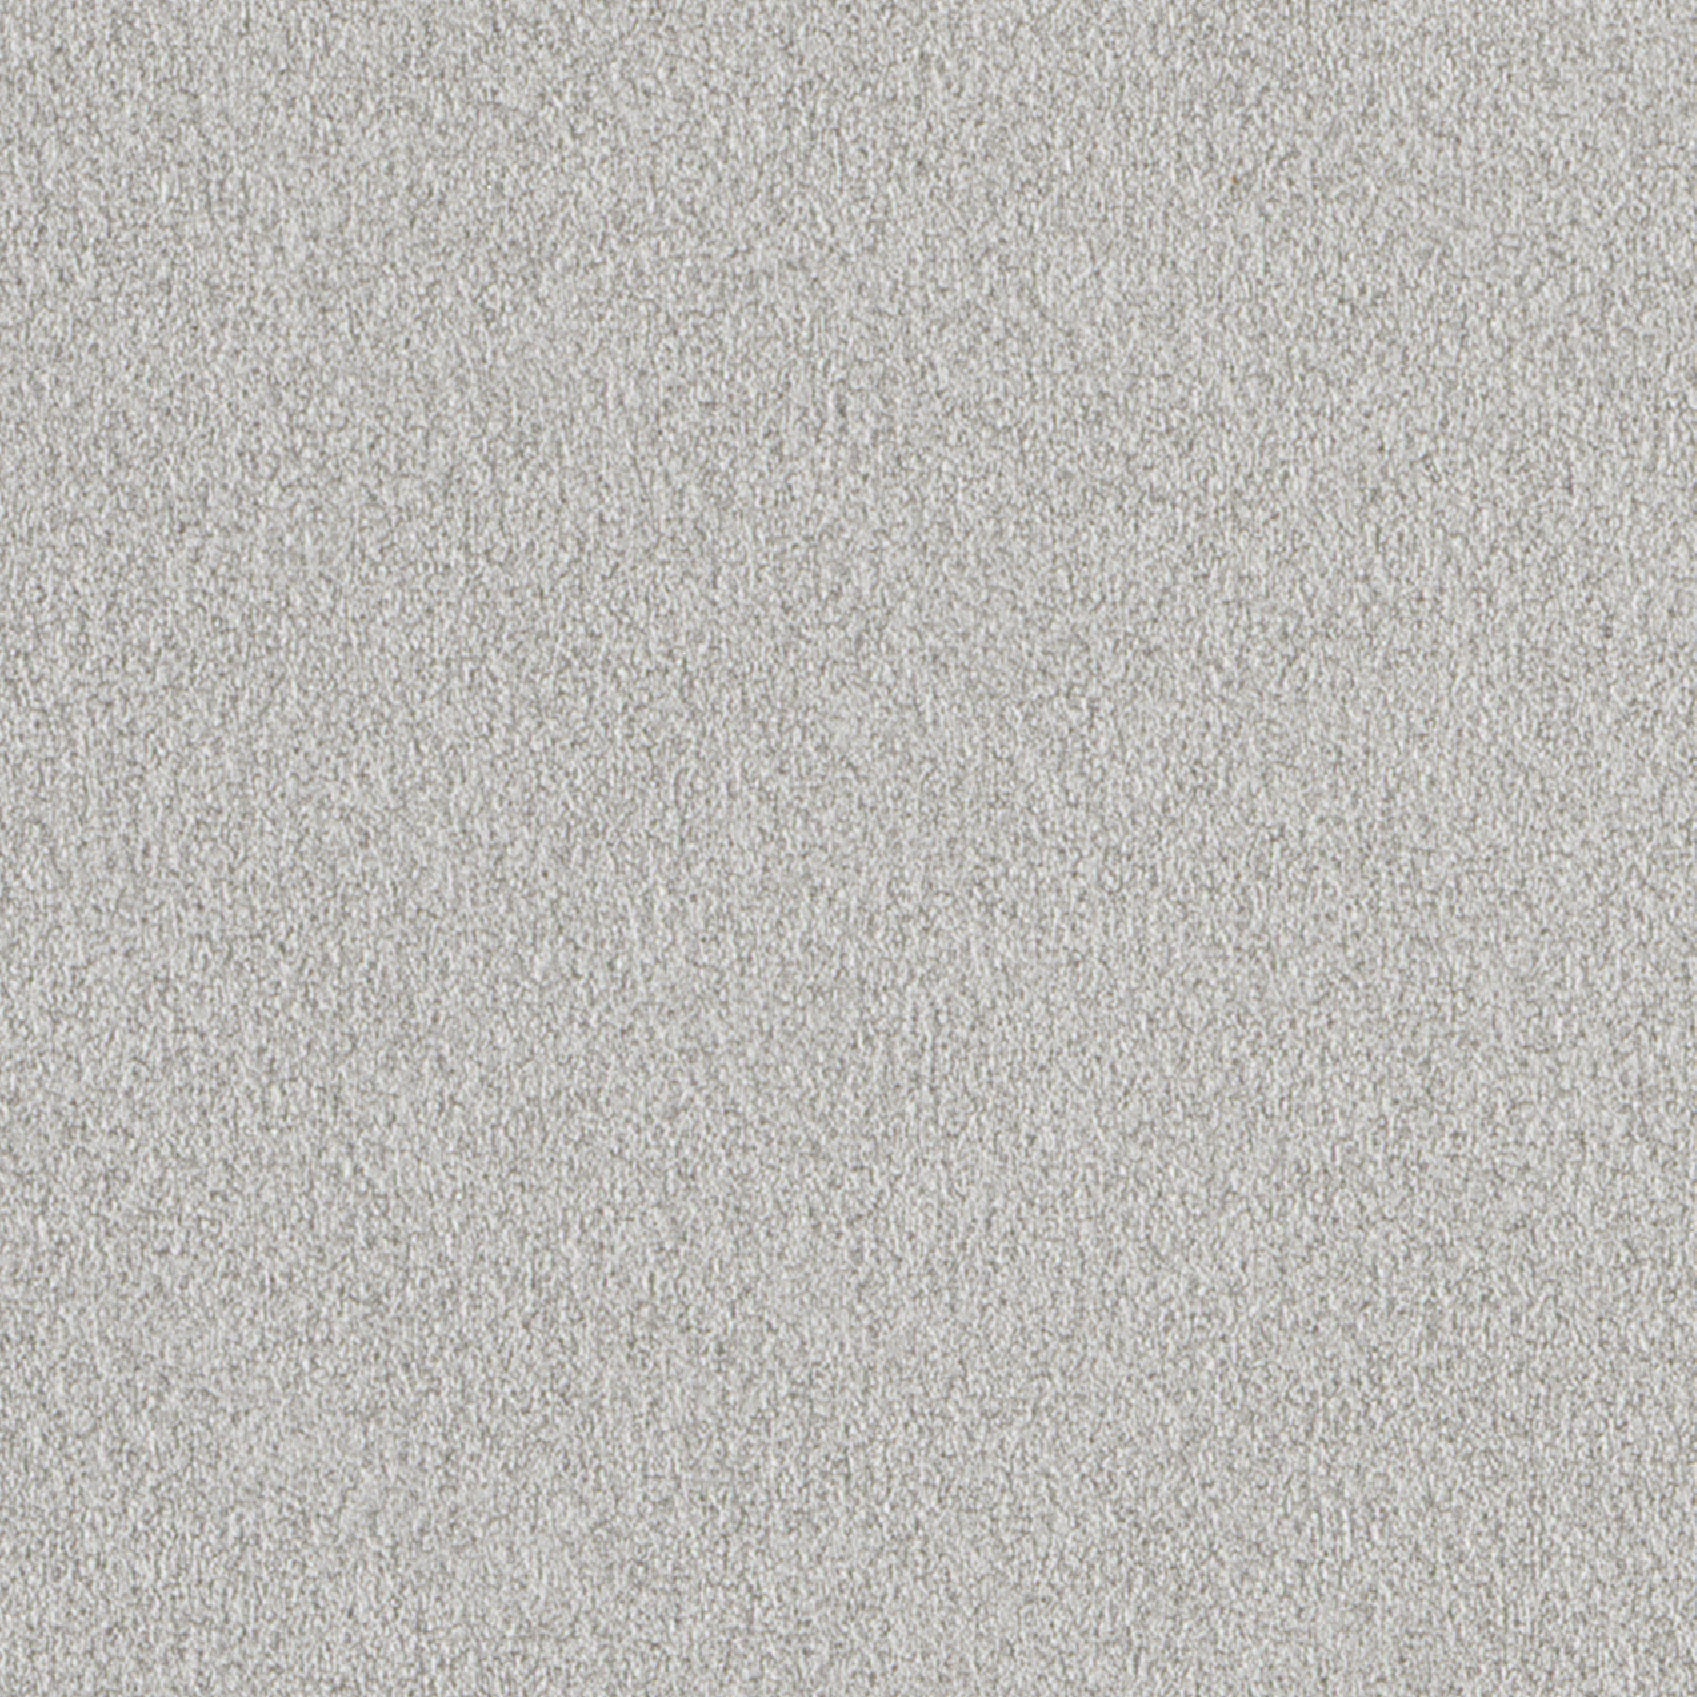 Andriali-Contract-Vinyl_Upholstery-Design-Serenity-Color-005Mist-Width-140cm